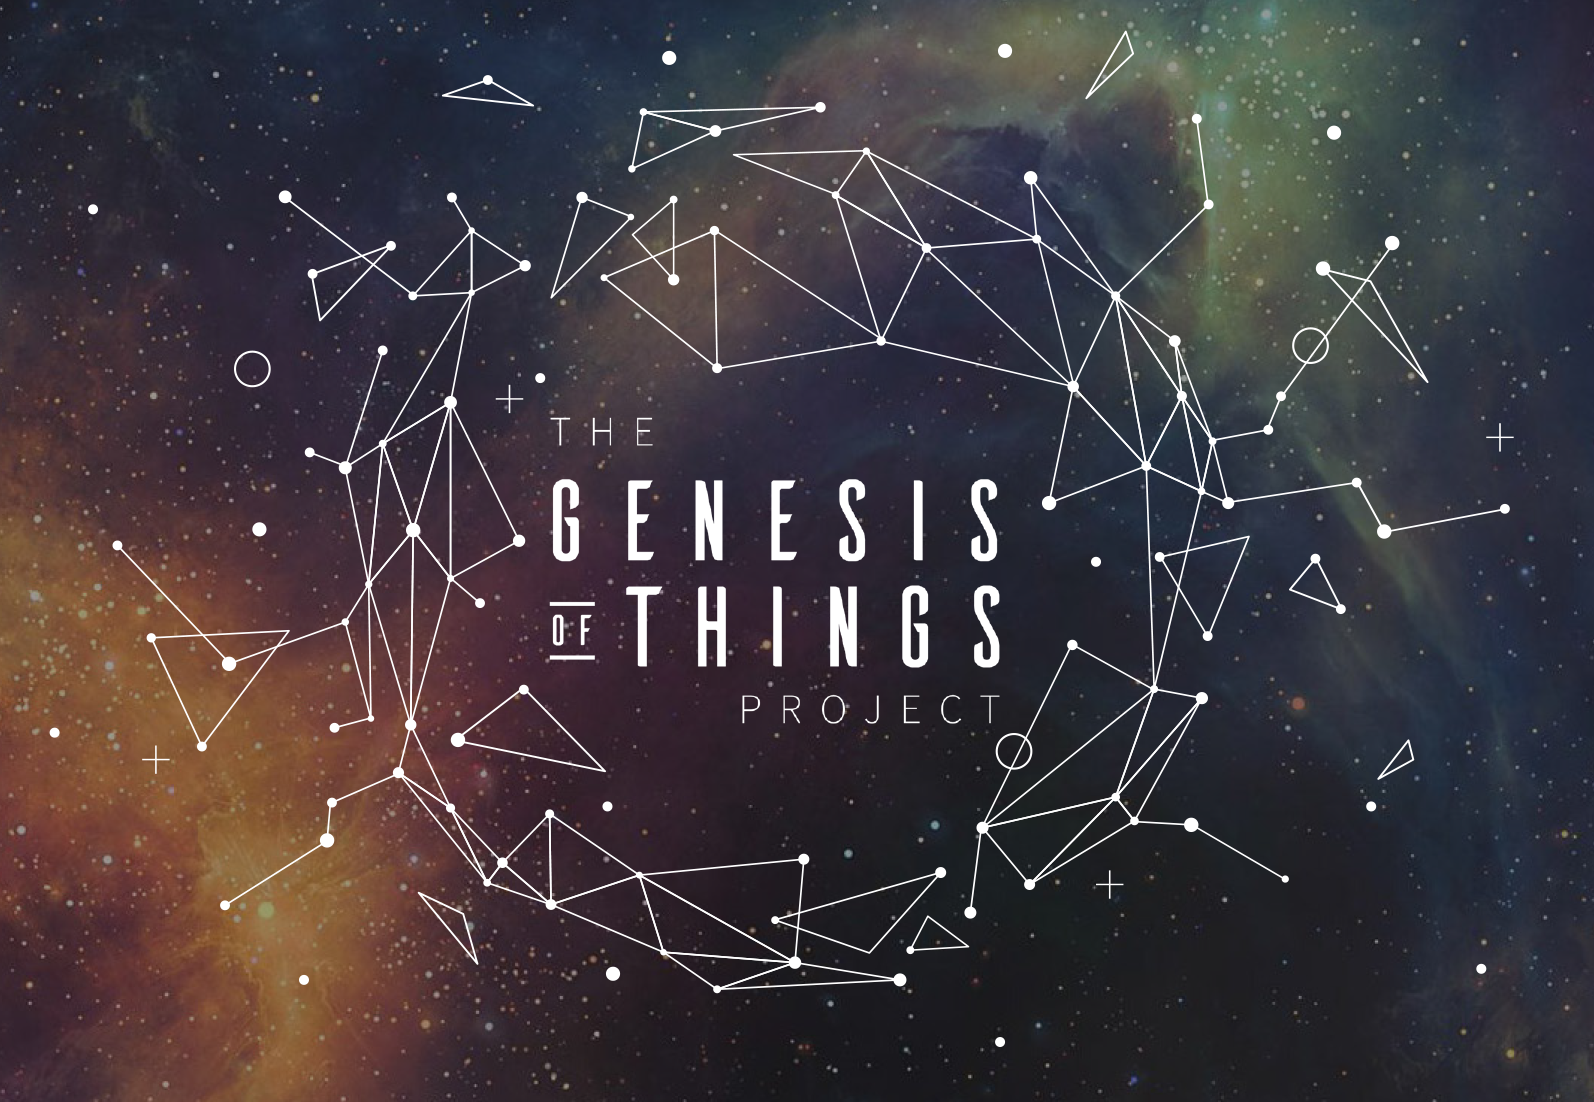 The Genesis of Things Project